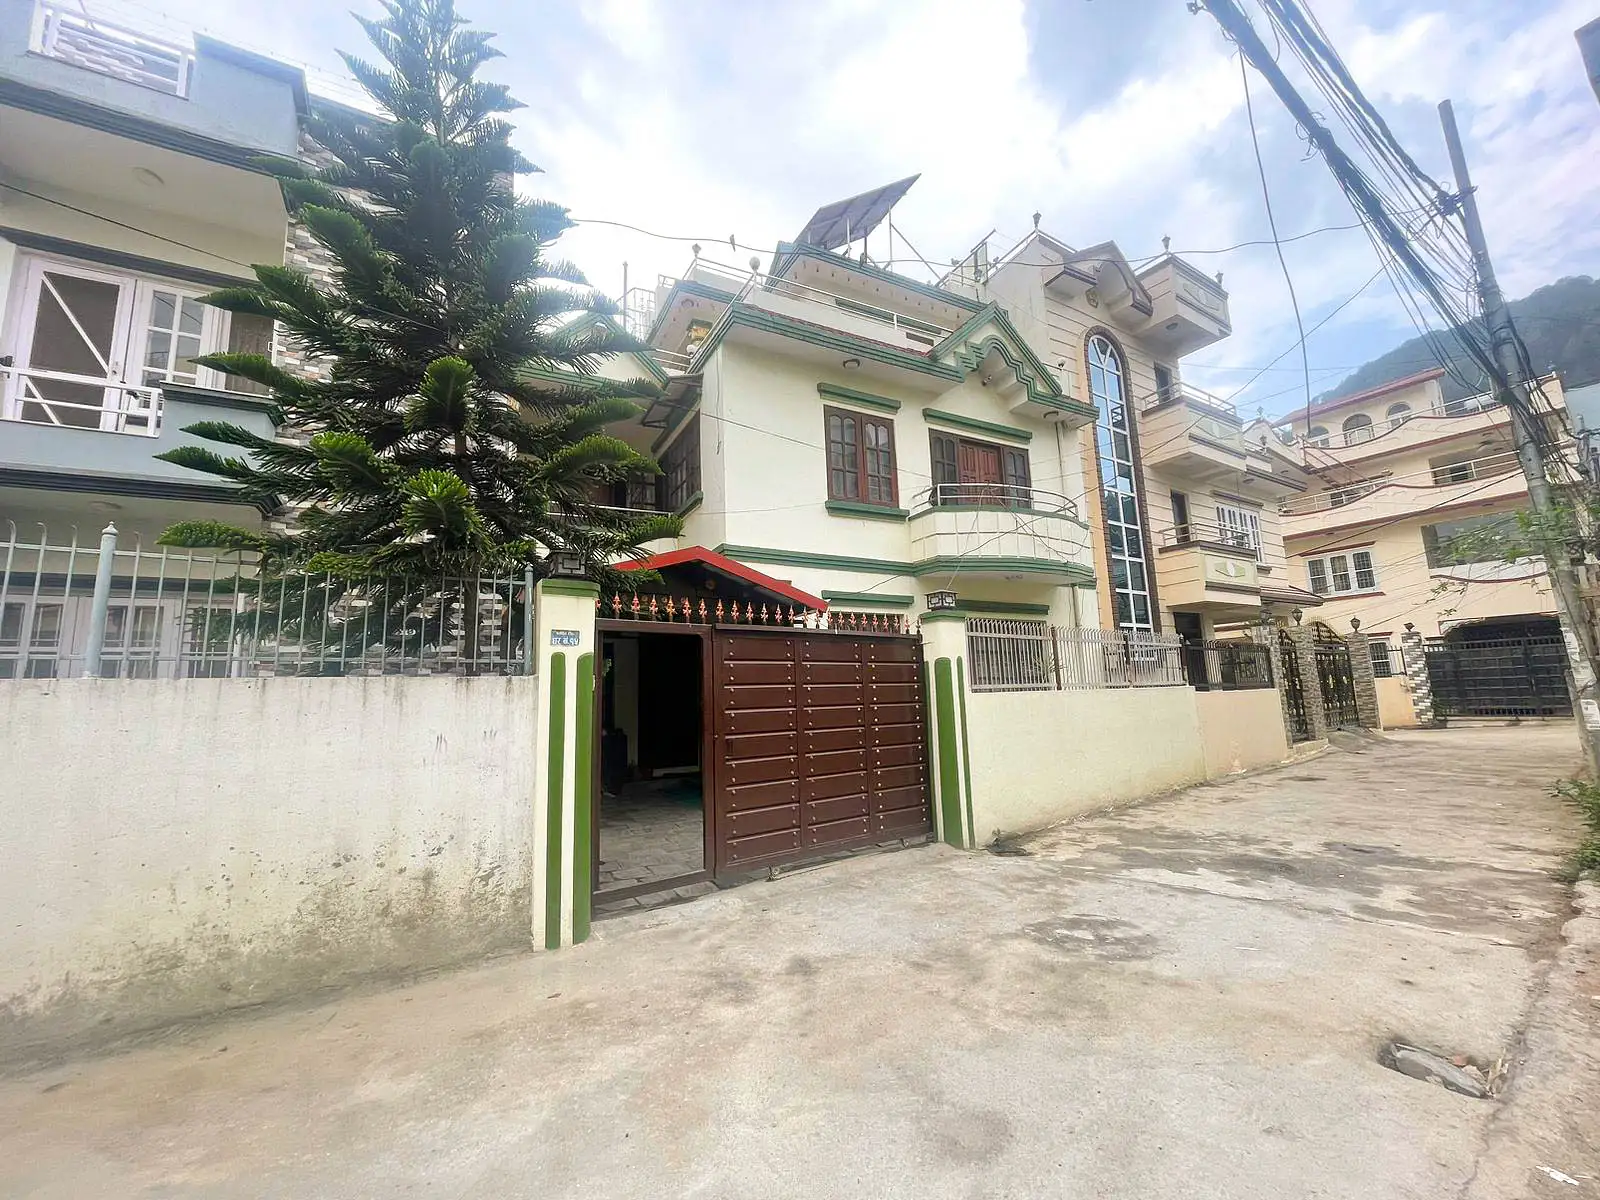 Bungalow house for sale in Balaju height Image 8